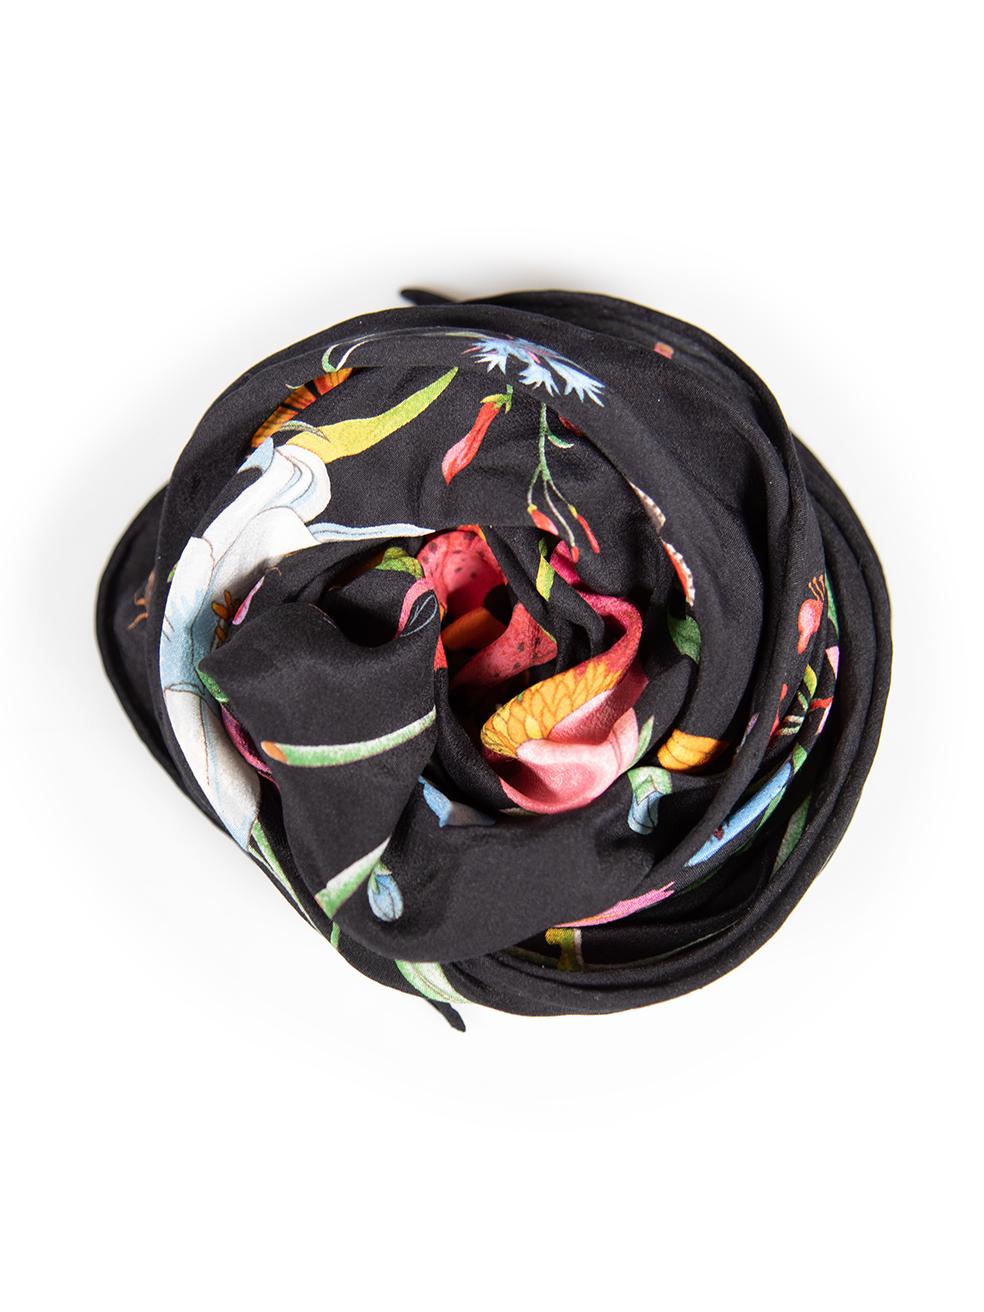 CONDITION is Very good. Minimal wear to scarf is evident. Minimal discolouration mark to the back of the scarf. The brand and the composition label is missing on this used Gucci designer resale item.
 
 
 
 Details
 
 
 Multicolour- black tone
 
